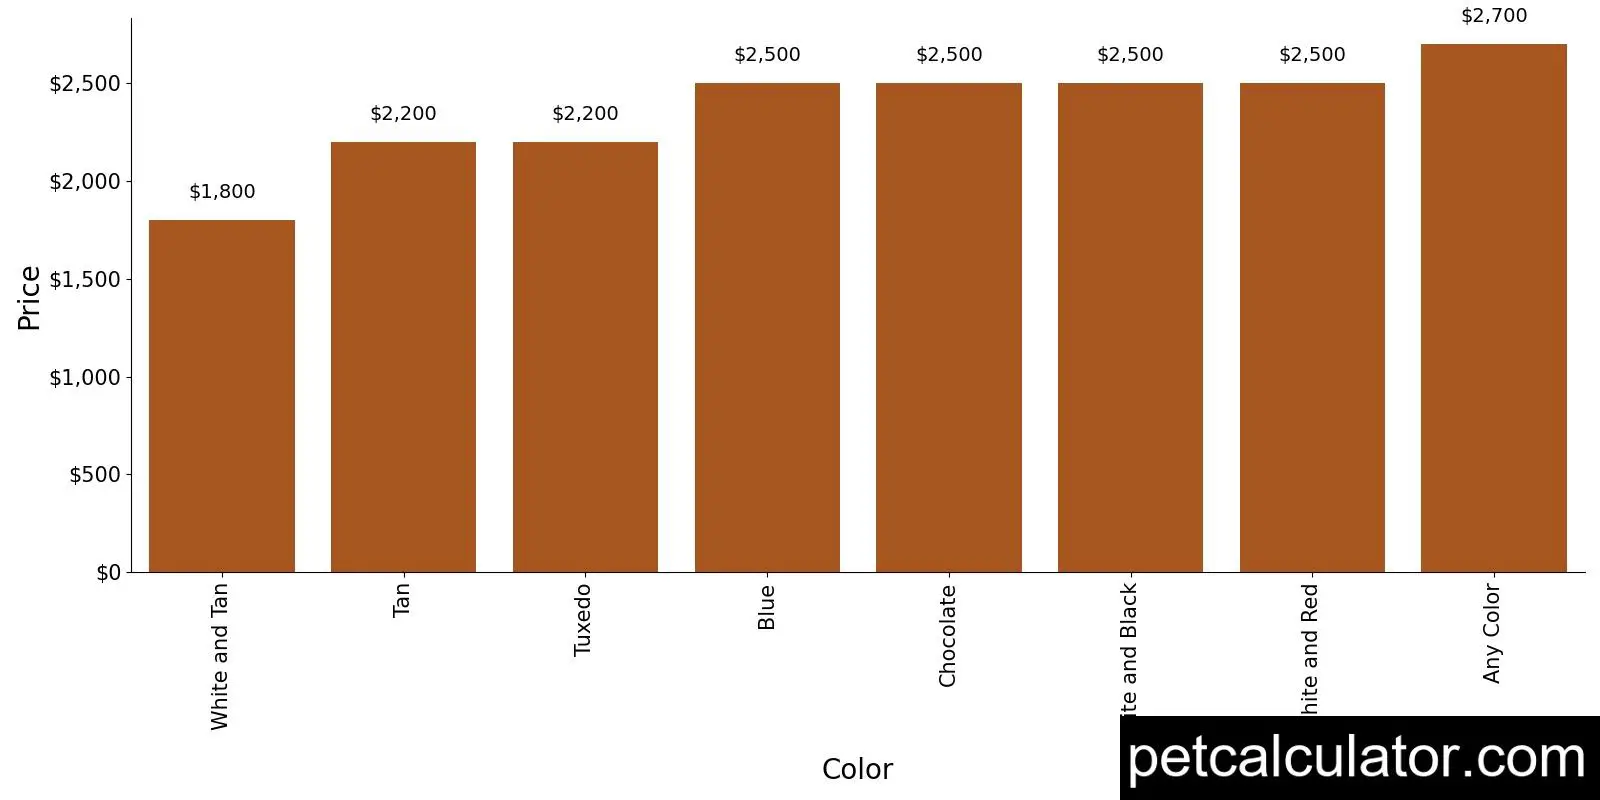 Price of Chinese Imperial by Color 